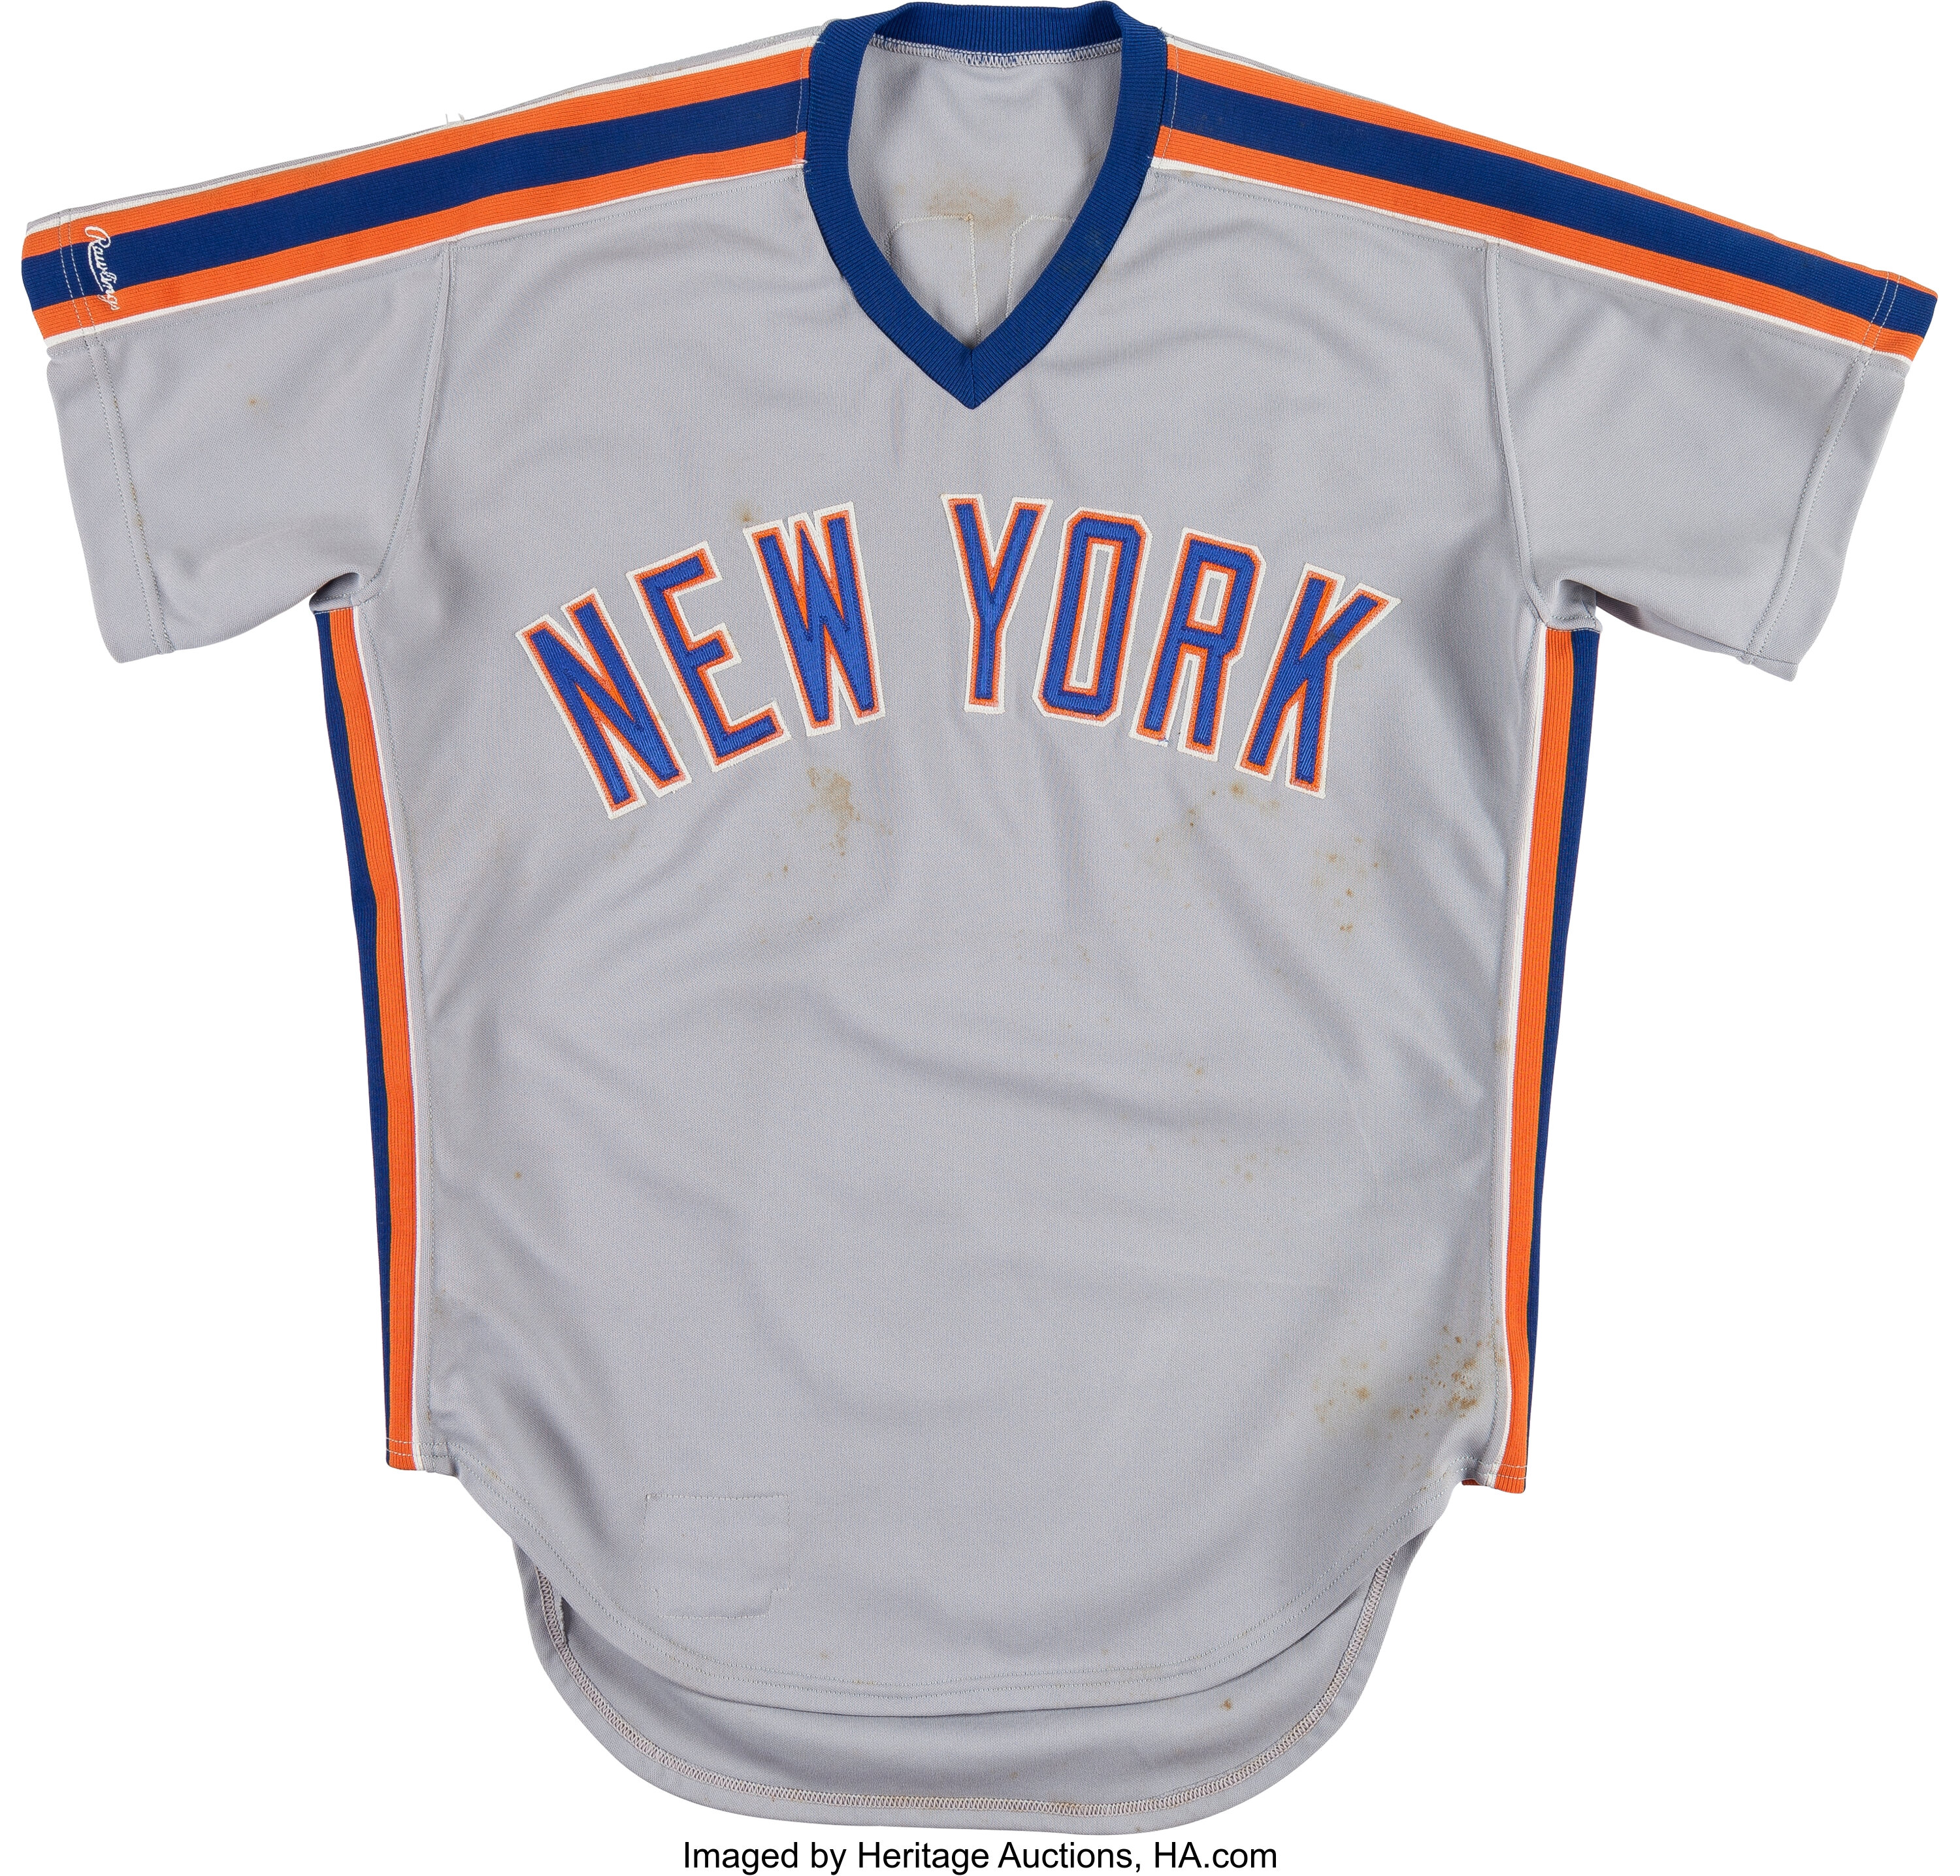 Authentic Dwight Gooden New York Mets 1986 Pullover Jersey - Shop